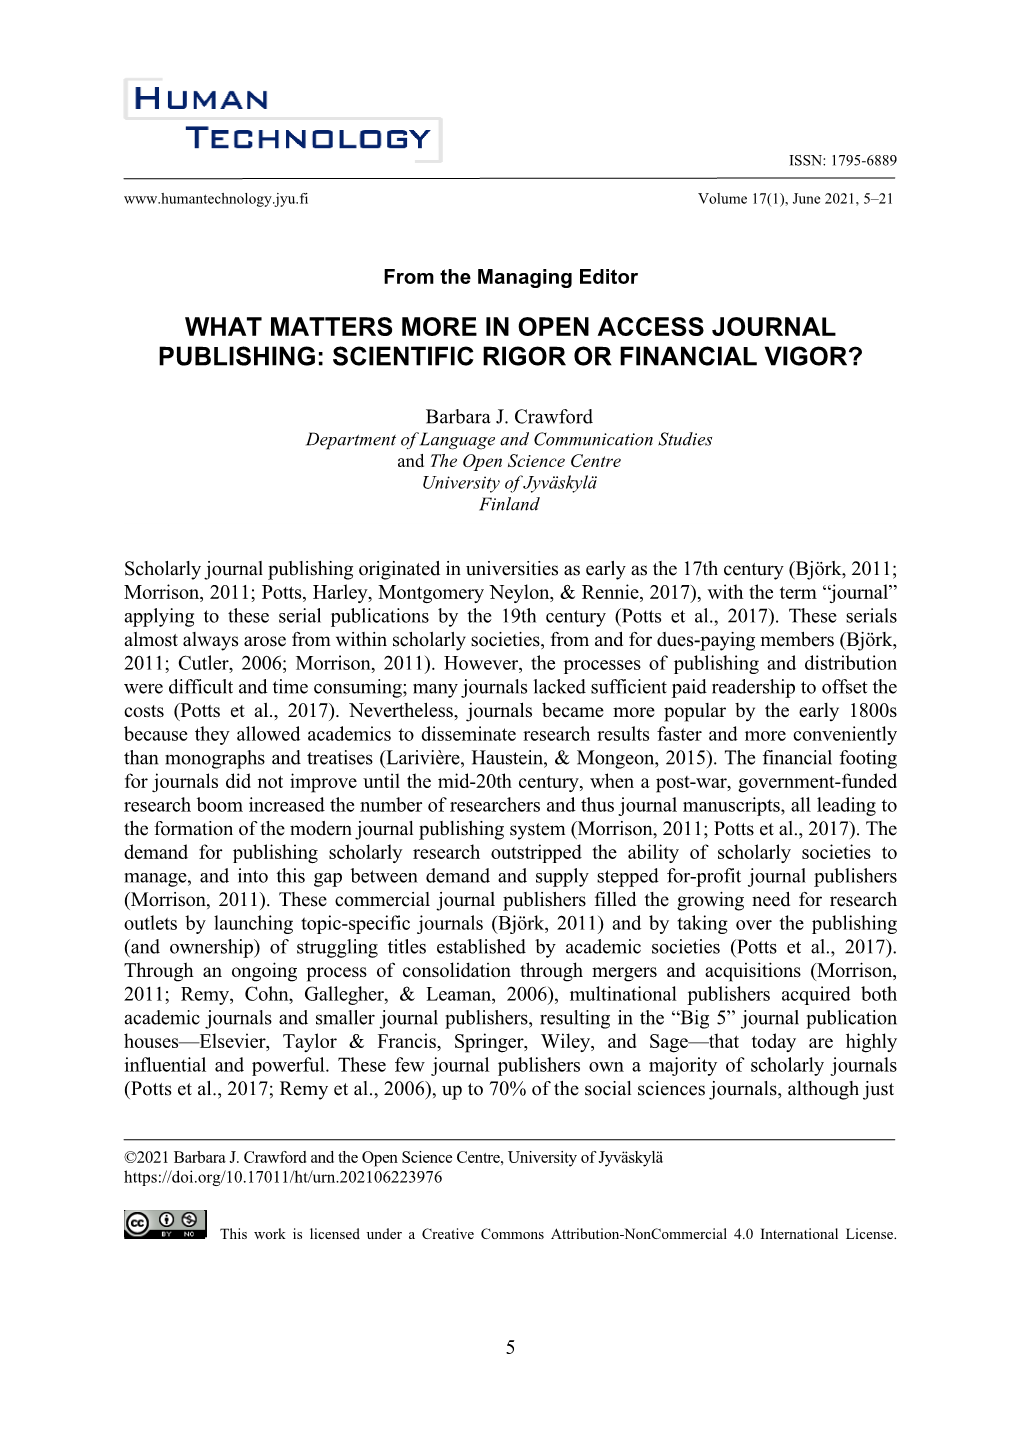 What Matters Most in Open Access Journal Publishing: Scientific Rigor